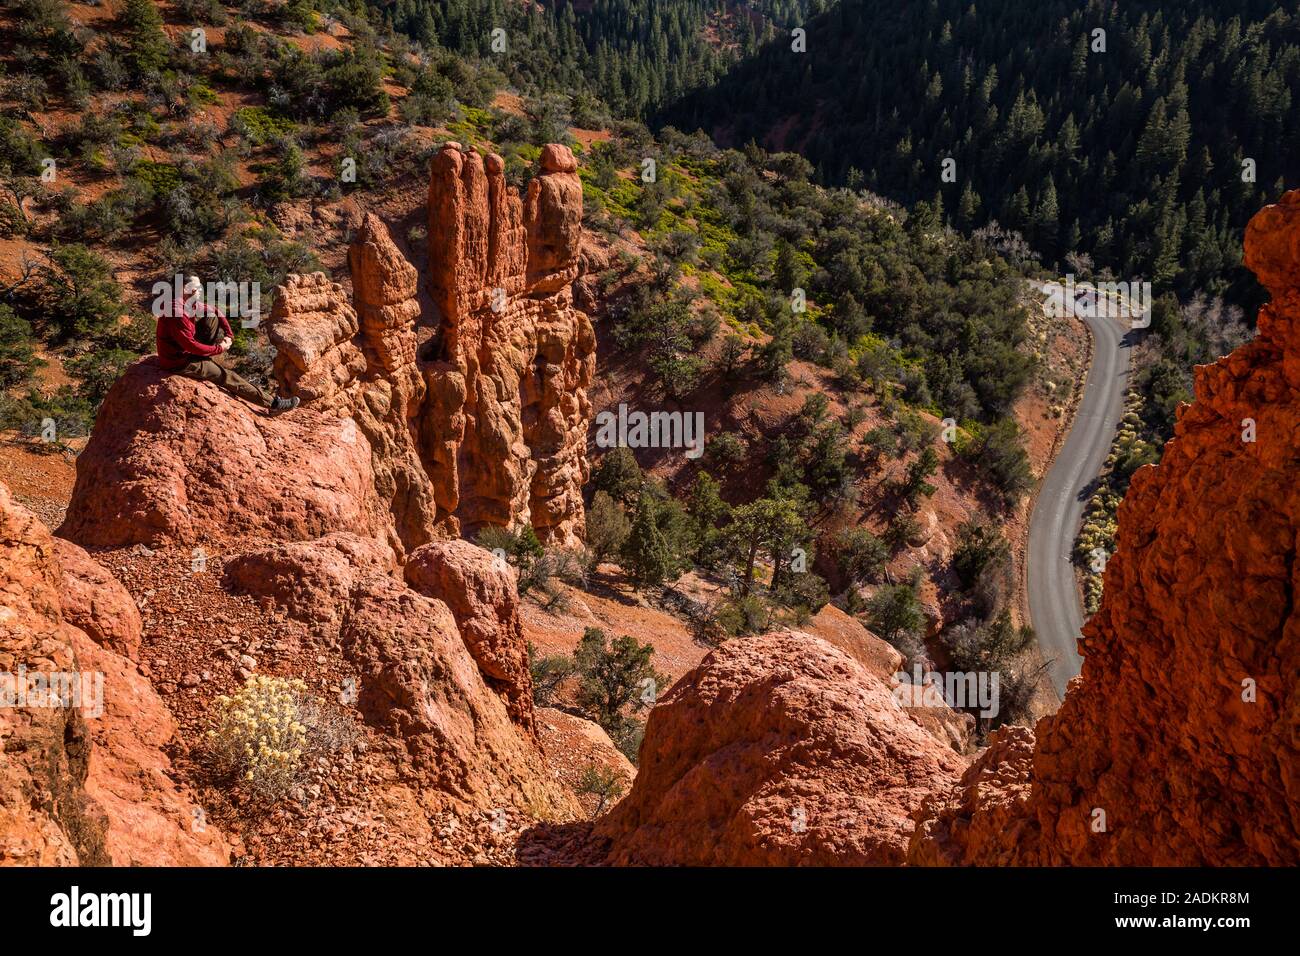 Man sitting atop red rock tower formation above winding canyon road far below. Stock Photo